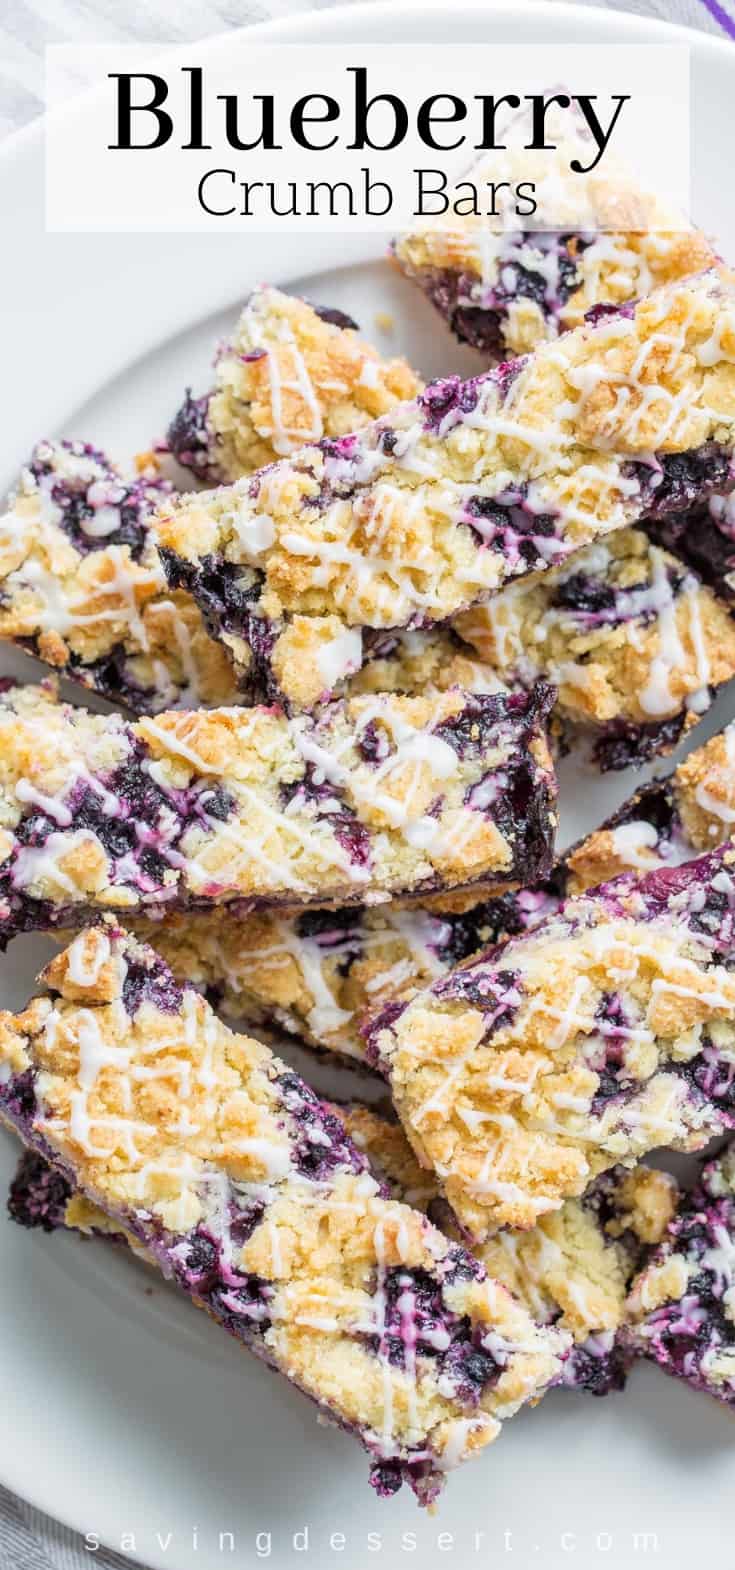 An overhead view of a plate of blueberry crumb bars drizzled with a lemon icing